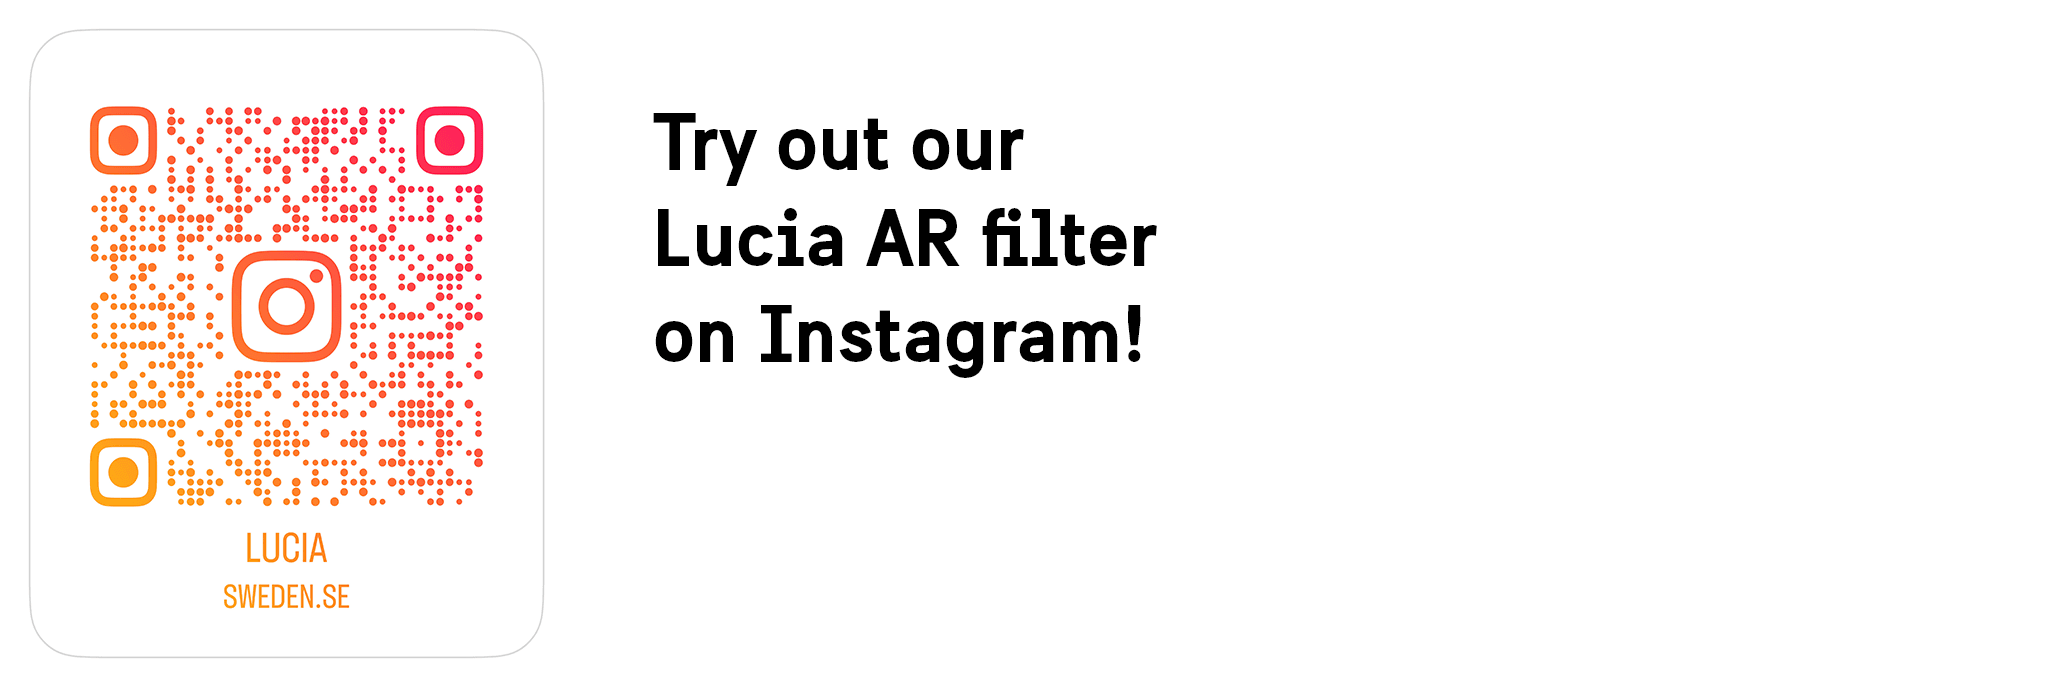 QR code leading to an AR filter on Instagram. Text: &quot;Try out our Lucia AR filter on Instagram!&quot;